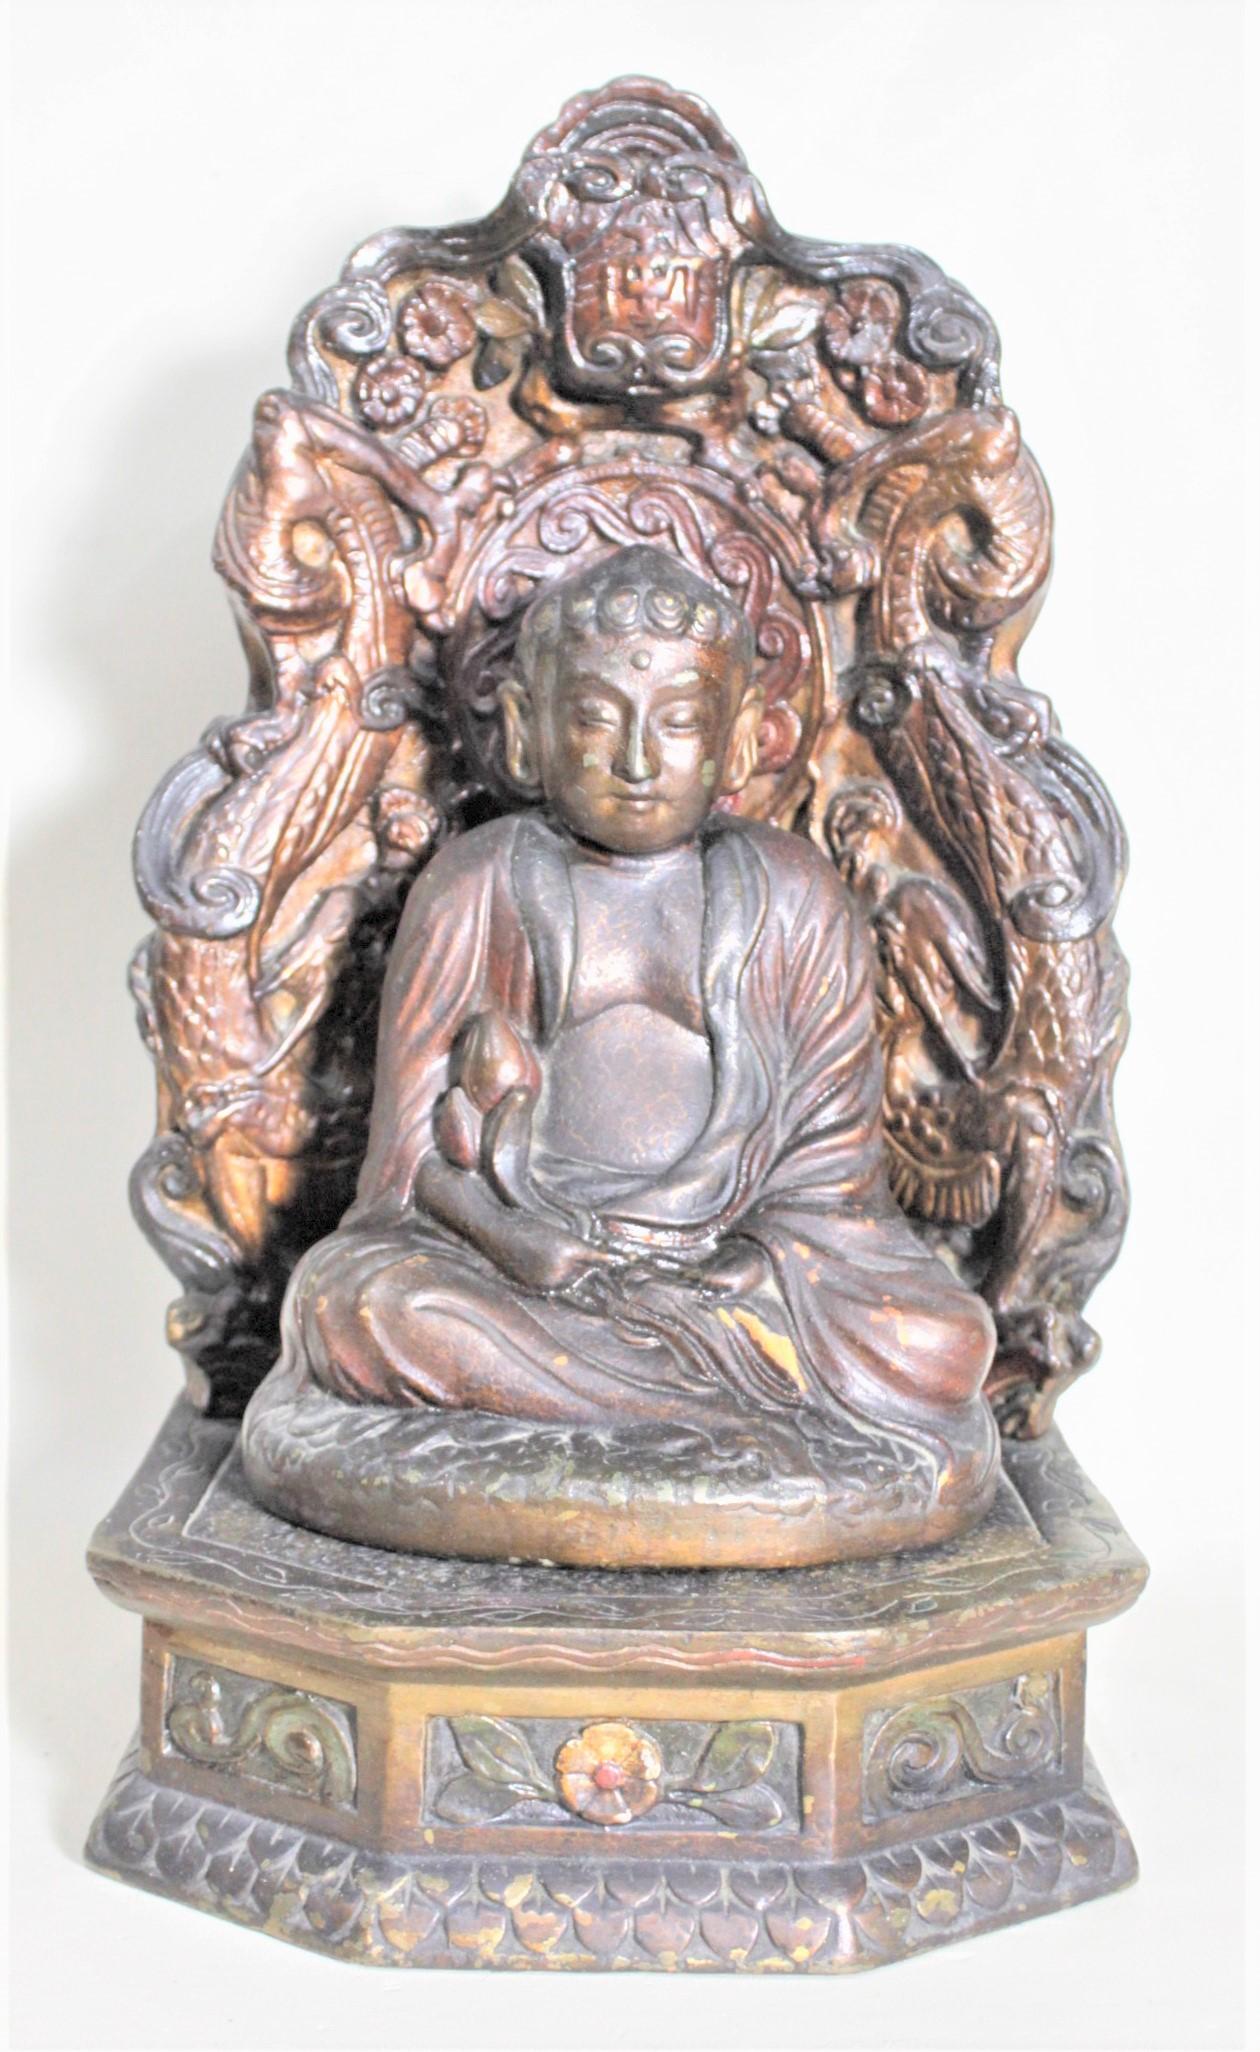 Chinoiserie Antique Bronze Clad & Polychrome Painted Buddha Sculpture with Pedestal Stand For Sale